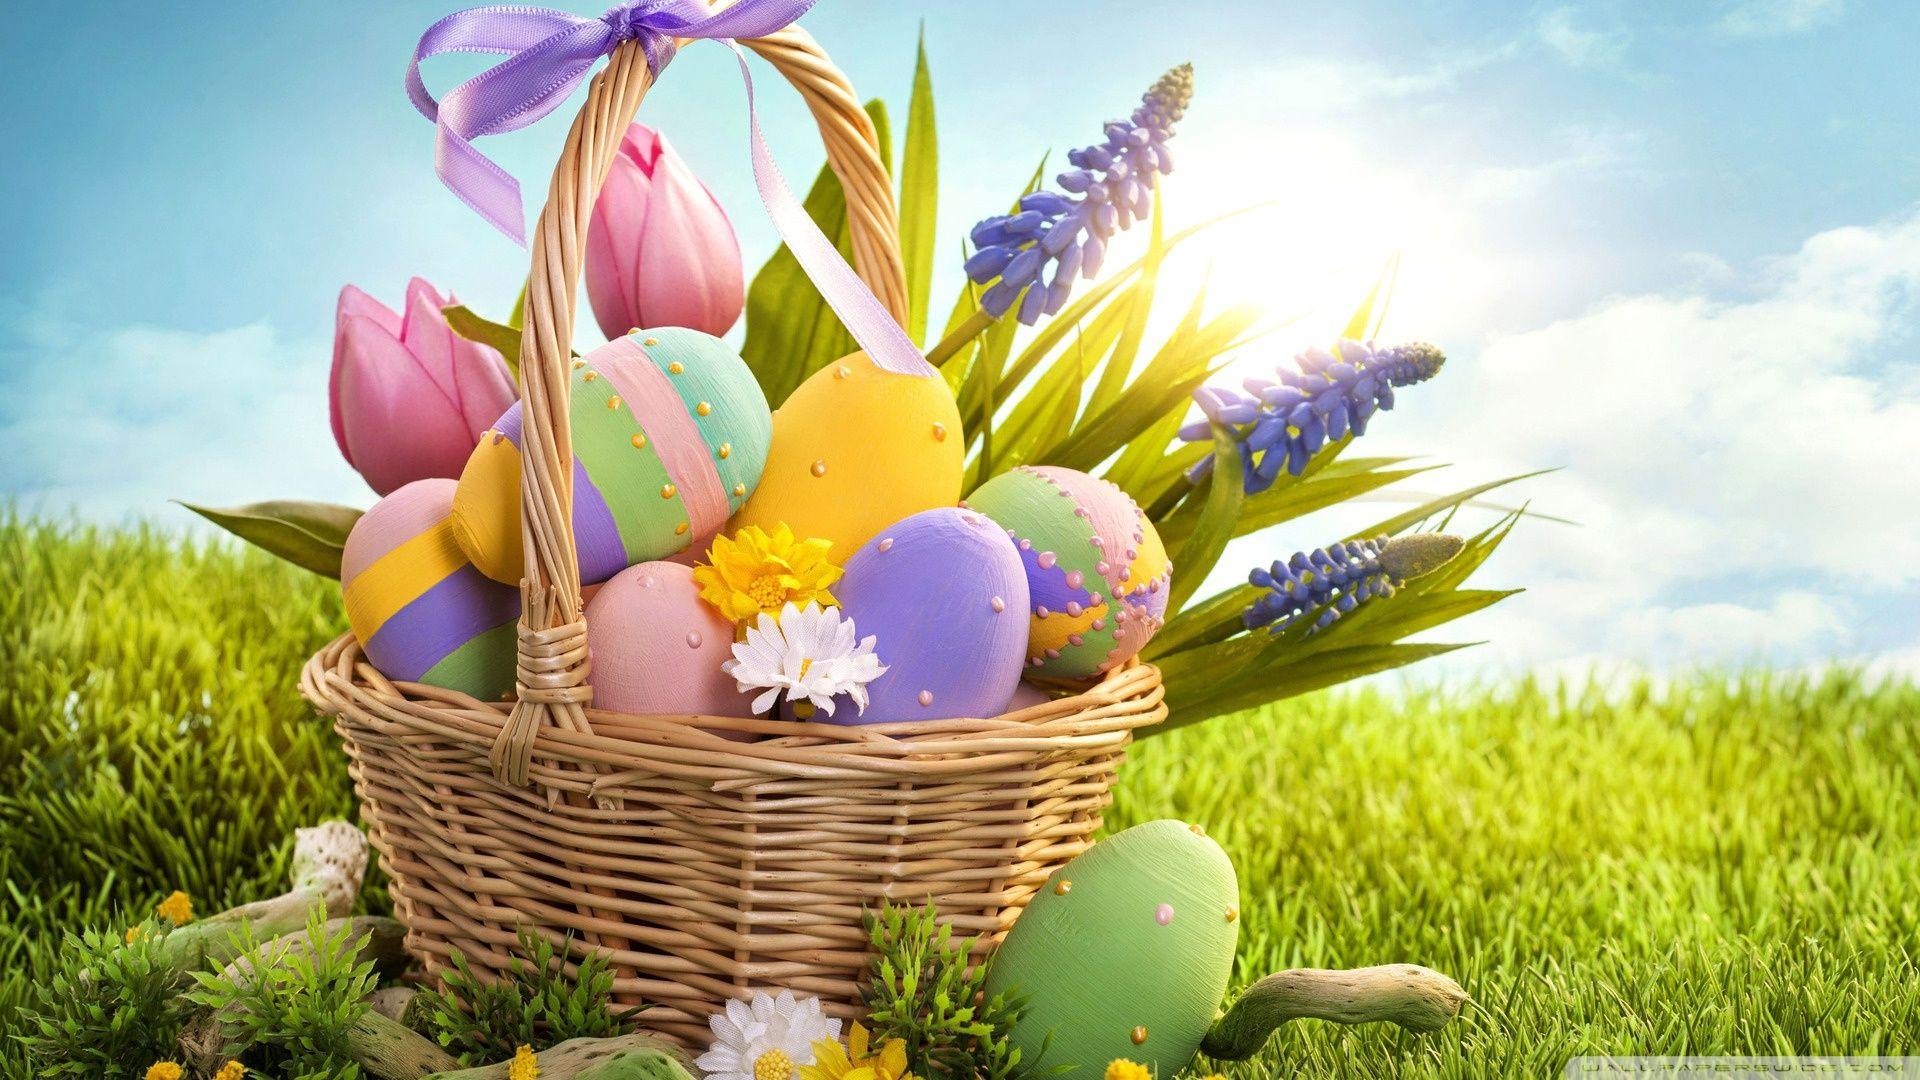 Easter Eggs Hd Wallpapers Wallpaper Cave